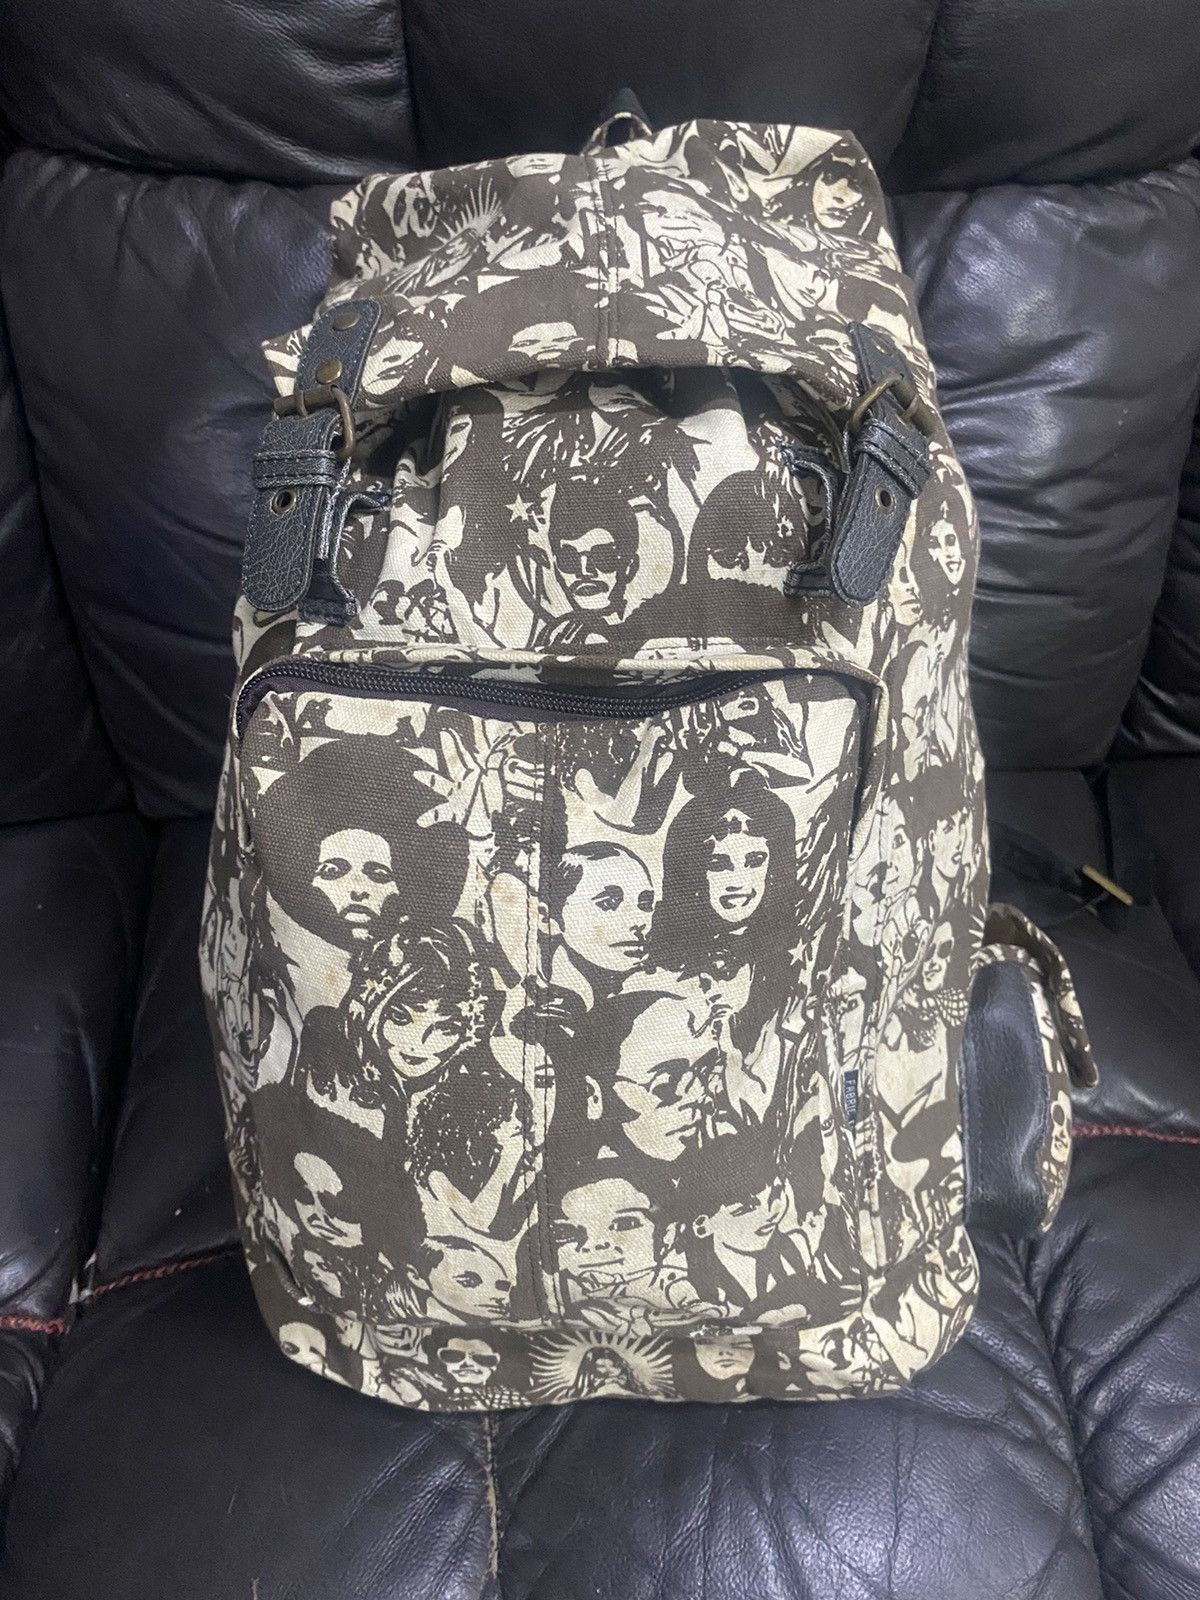 Face Pictures Backpack - 16